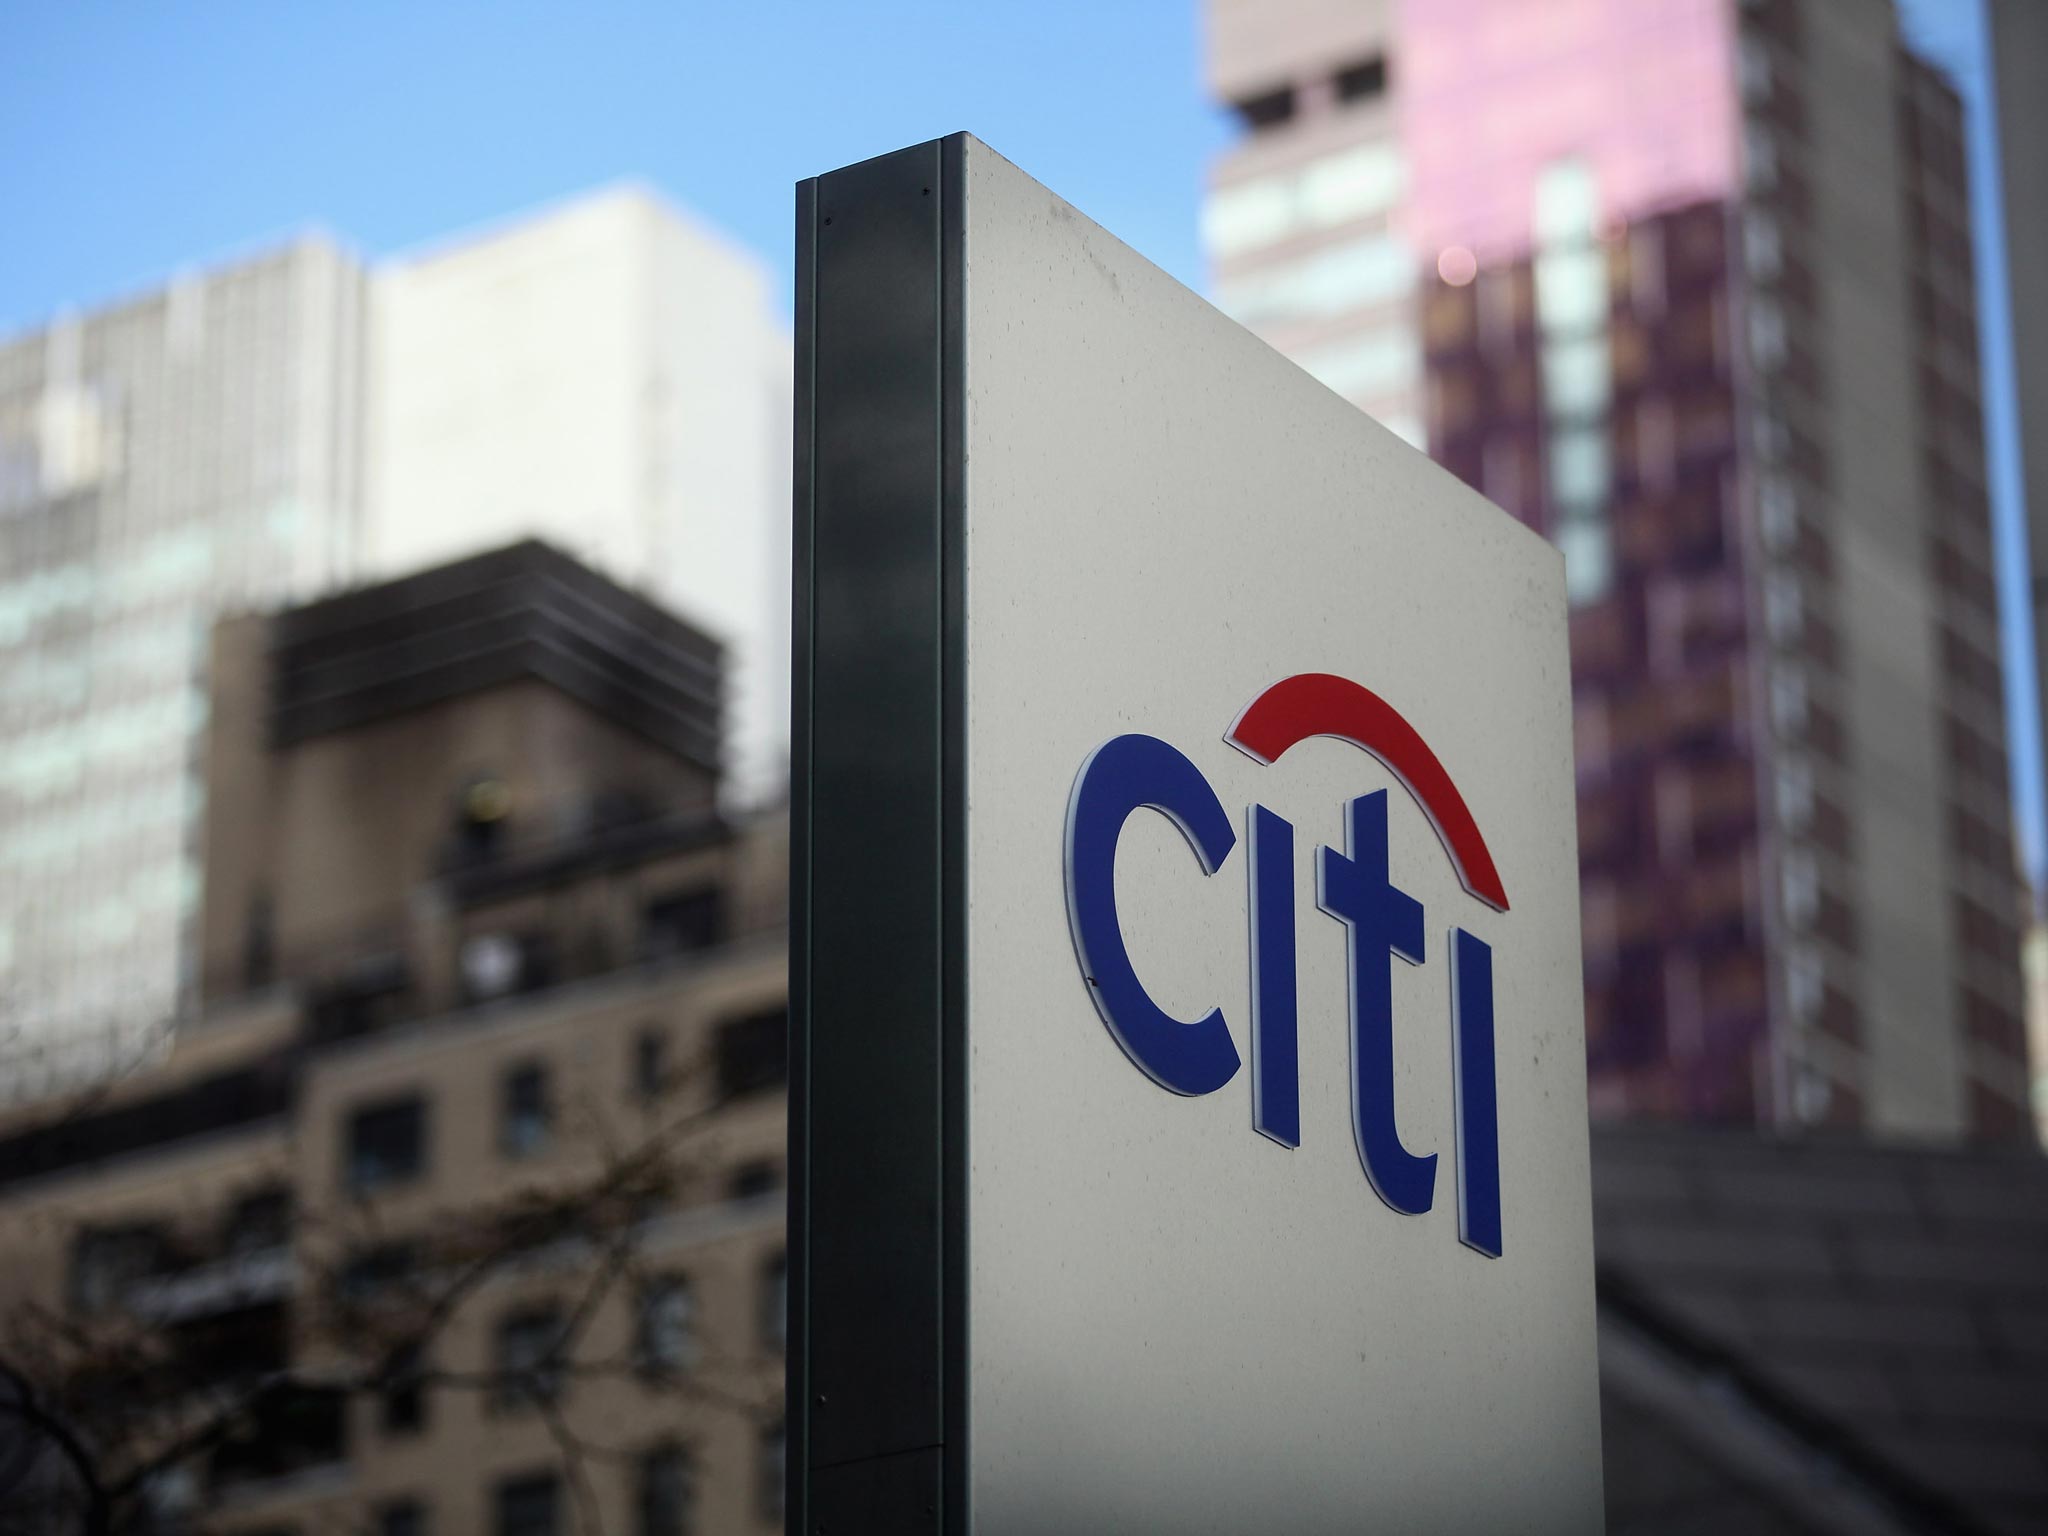 Major fraud uncovered in Mexico will cut $235m off Citi’s net profits